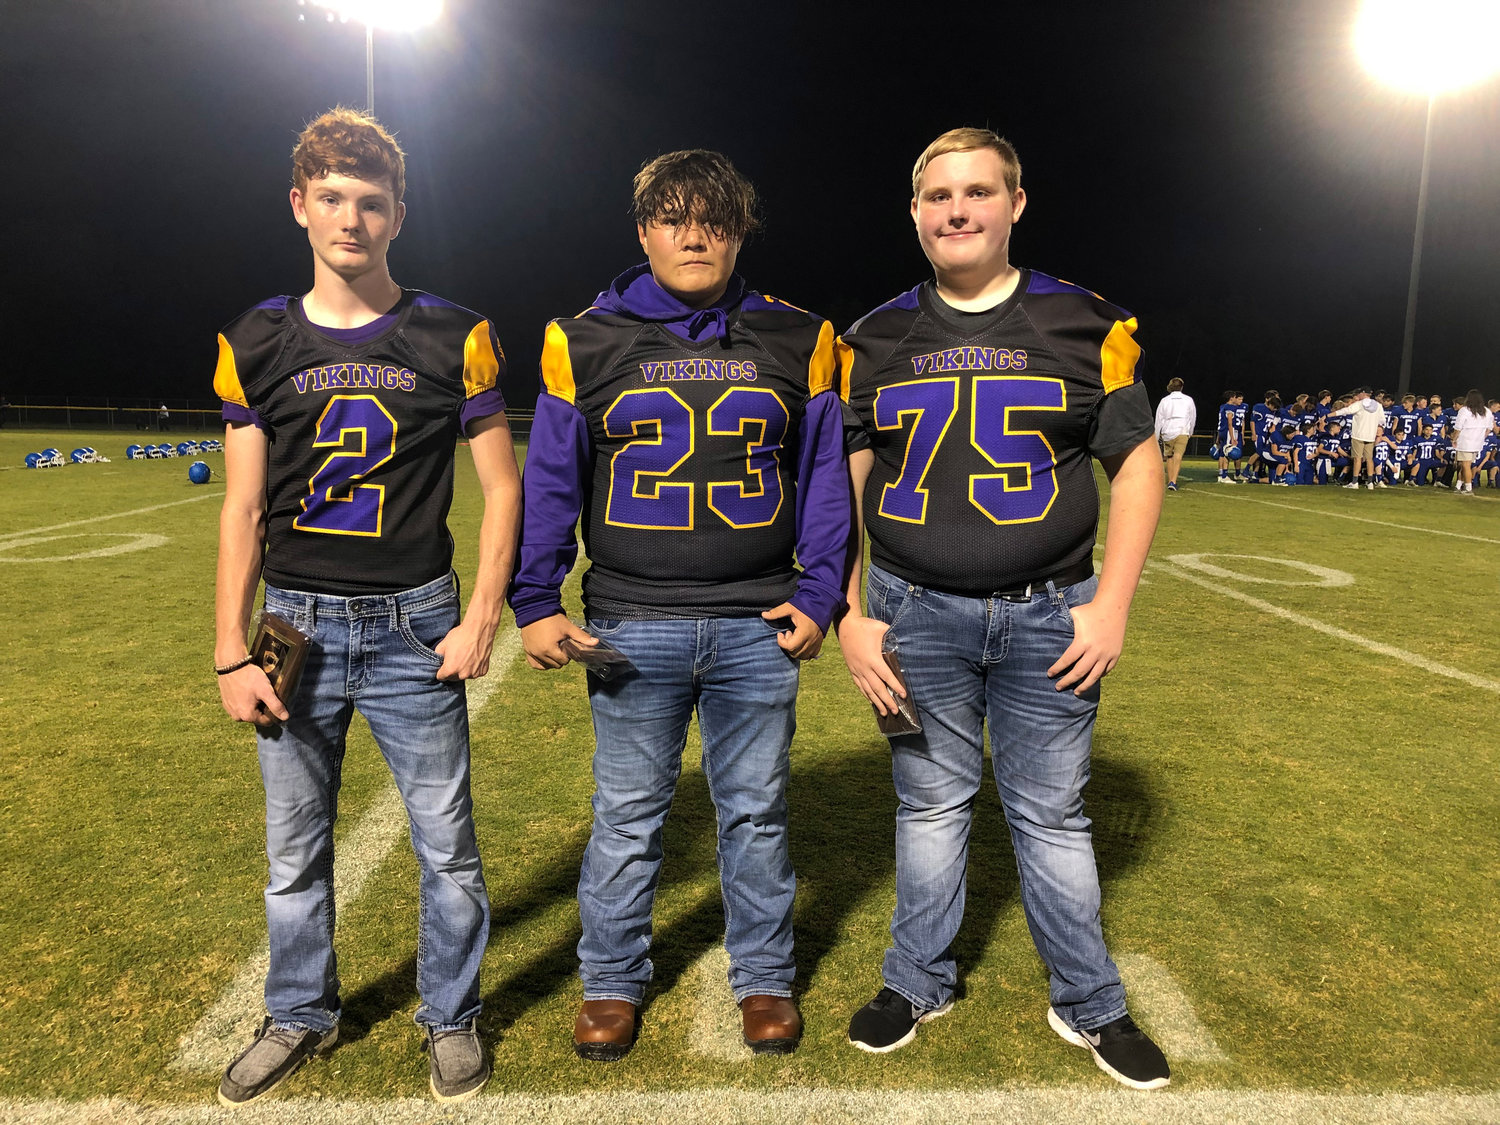 From left, Ethan O’Neal (2), Daniel Walters (23) and Jackson Mayo (75) of Community Middle earned All-Duck River Valley Conference honors.